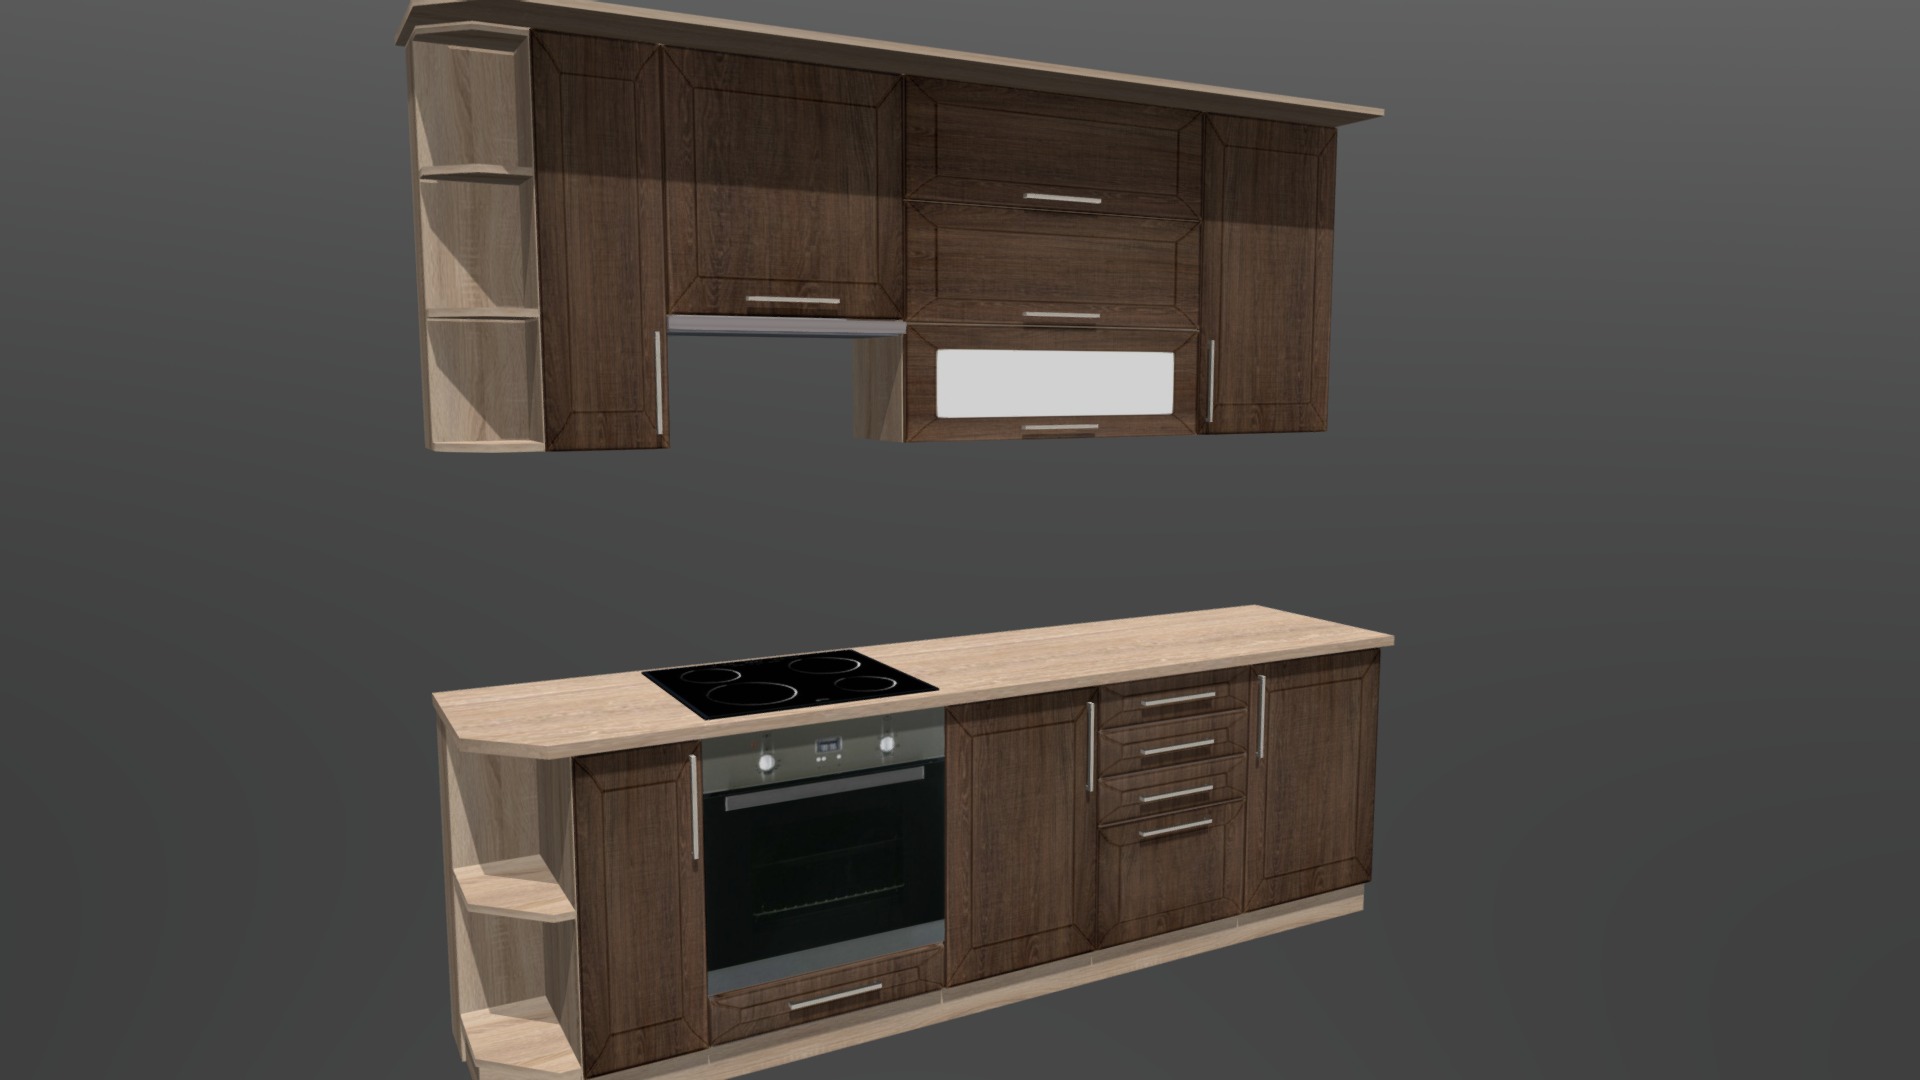 3D model Kitchen Cabinet 9 - This is a 3D model of the Kitchen Cabinet 9. The 3D model is about a kitchen with a stove and cabinets.